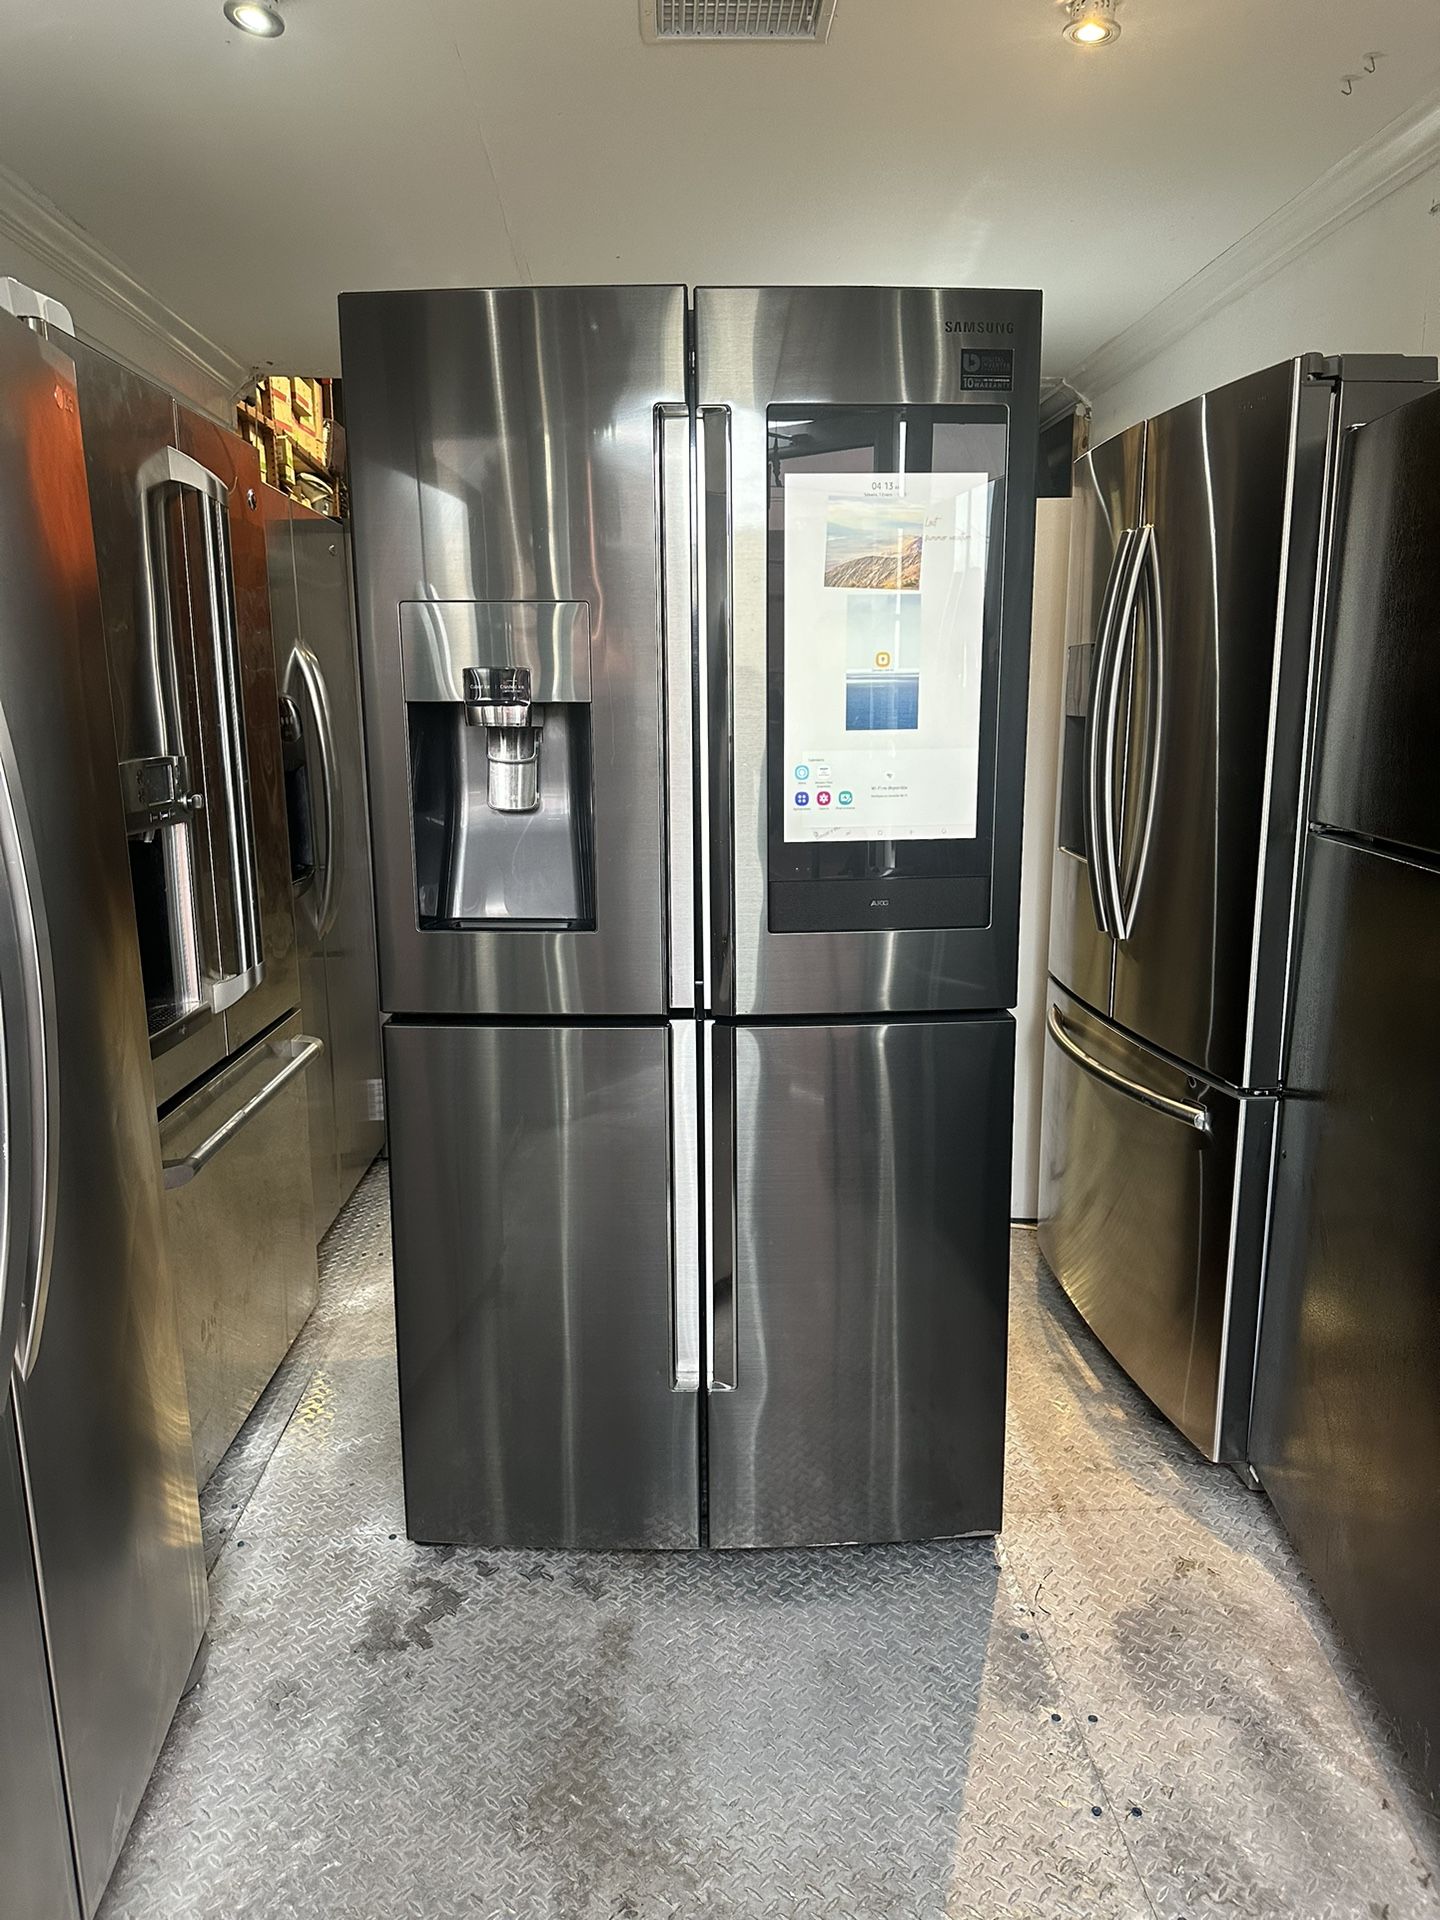 Refrigerator LG, 36x28x72, Counter Depth, 4 Doors, Warranty 3 Months, Delivery Available 